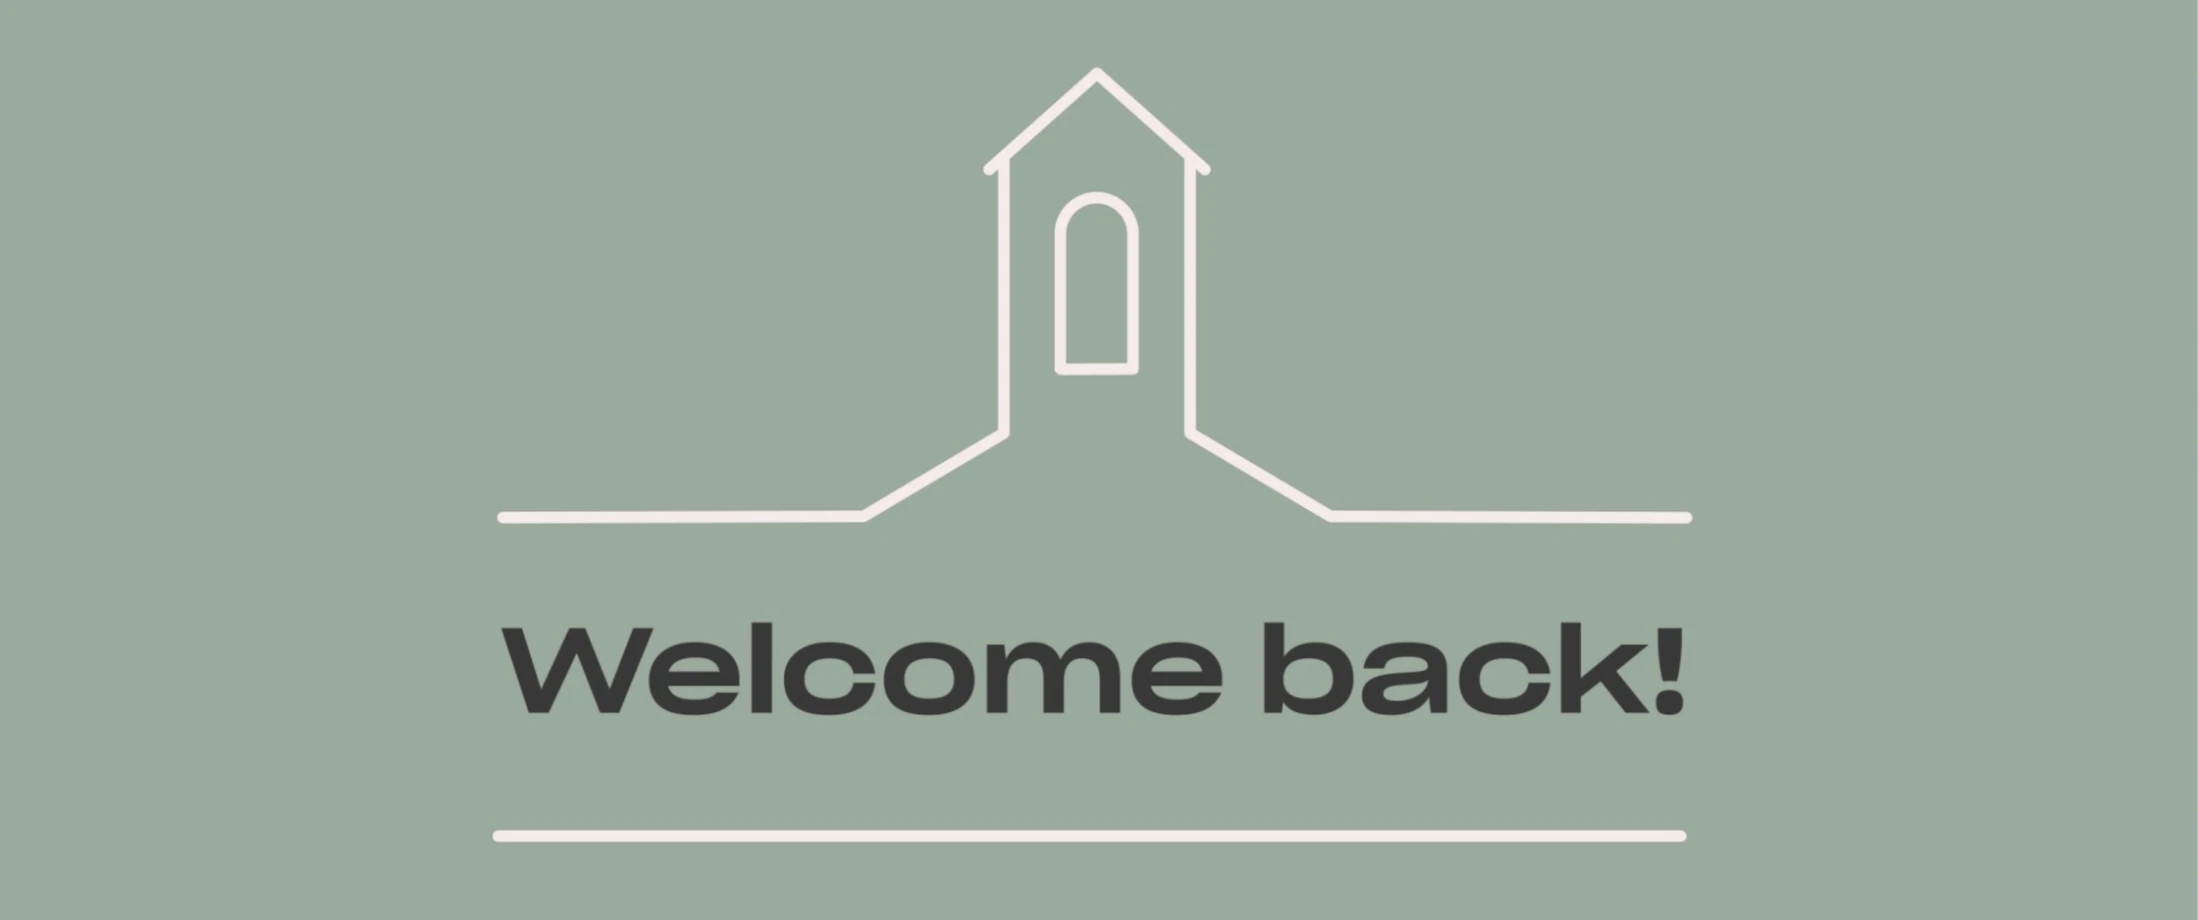 What to expect when you return to church